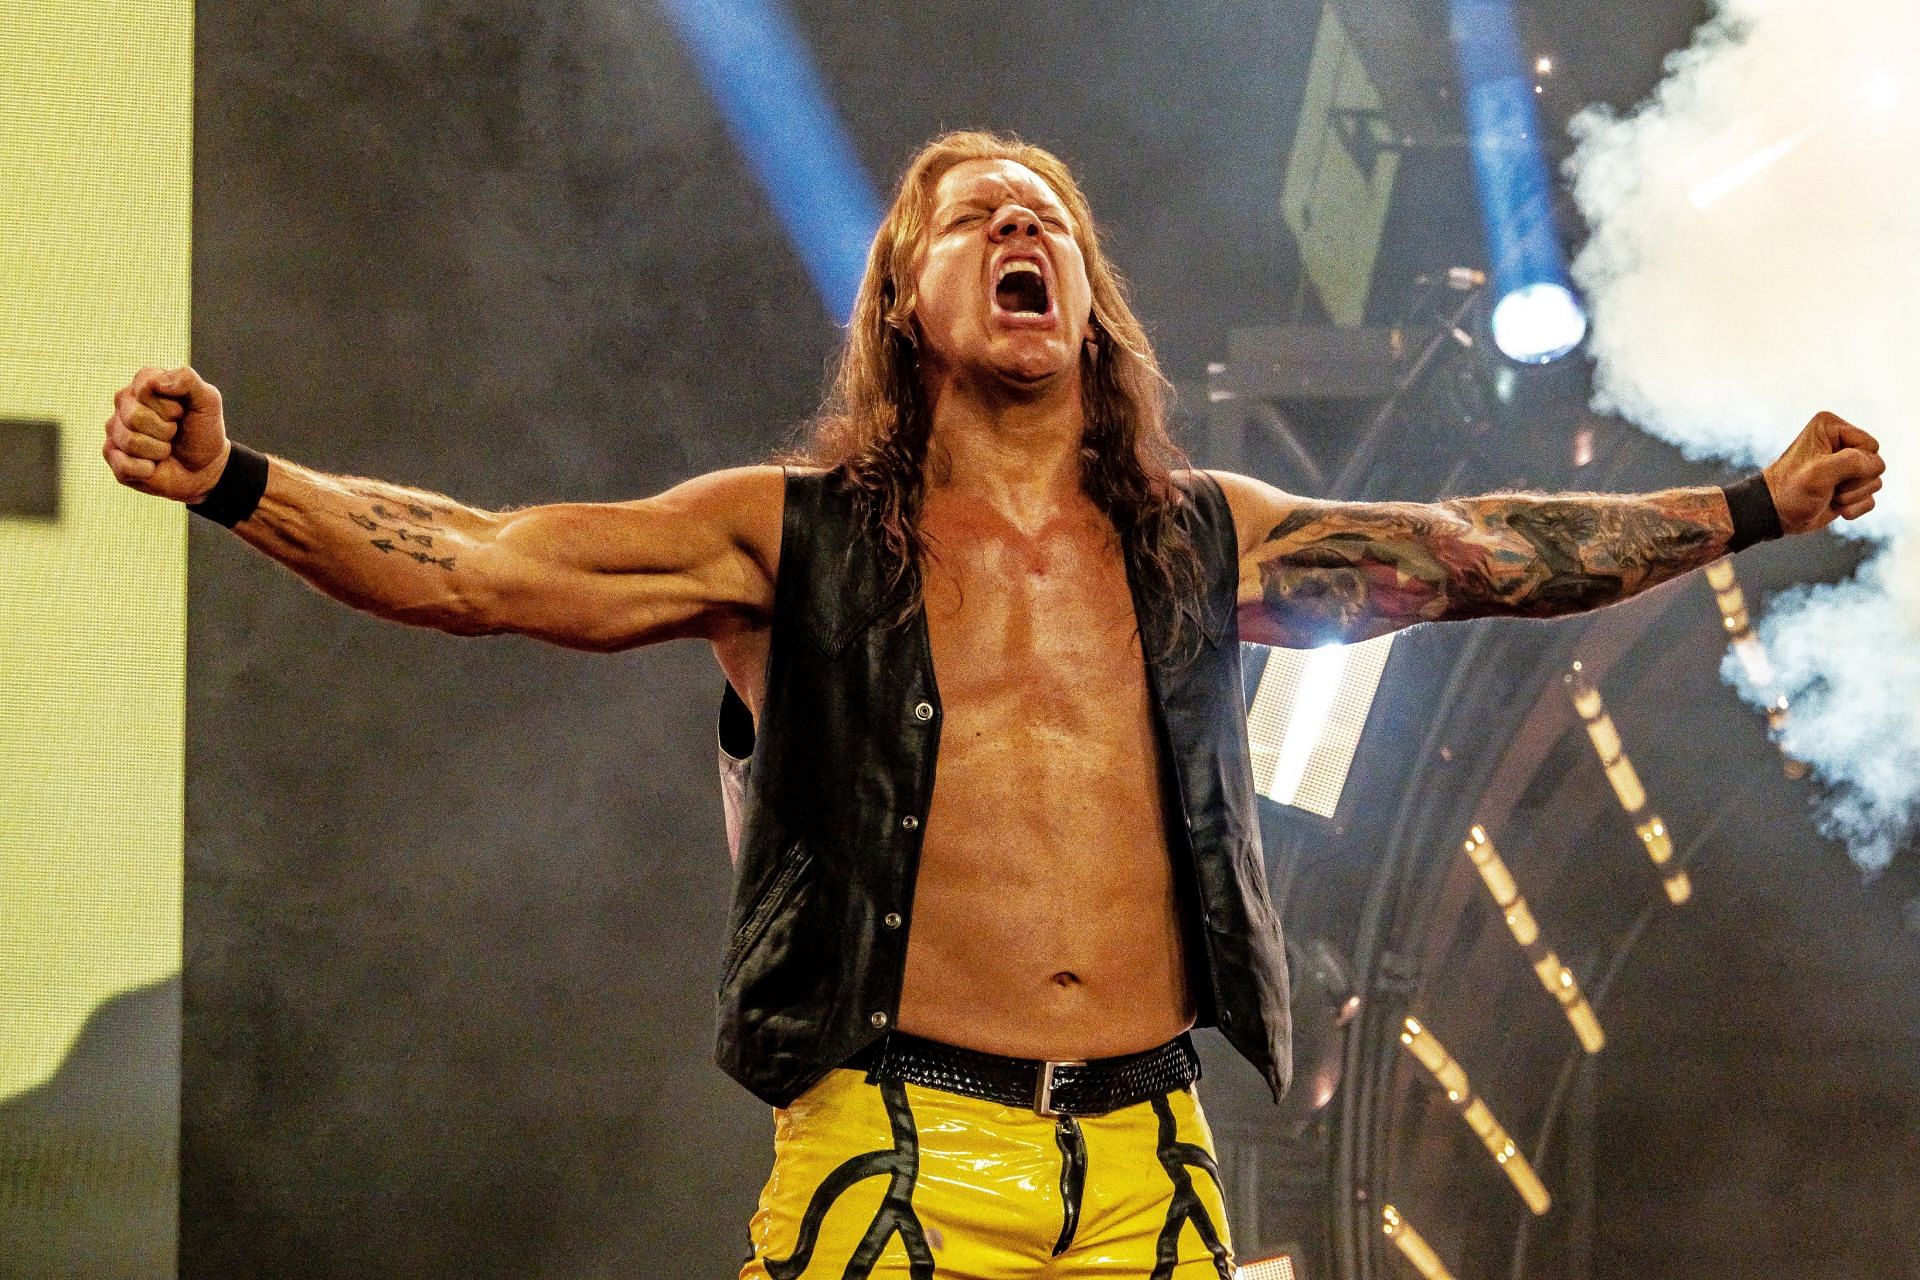 Chris Jericho Raises The Stakes For 23 Year Old Star S Macth On AEW